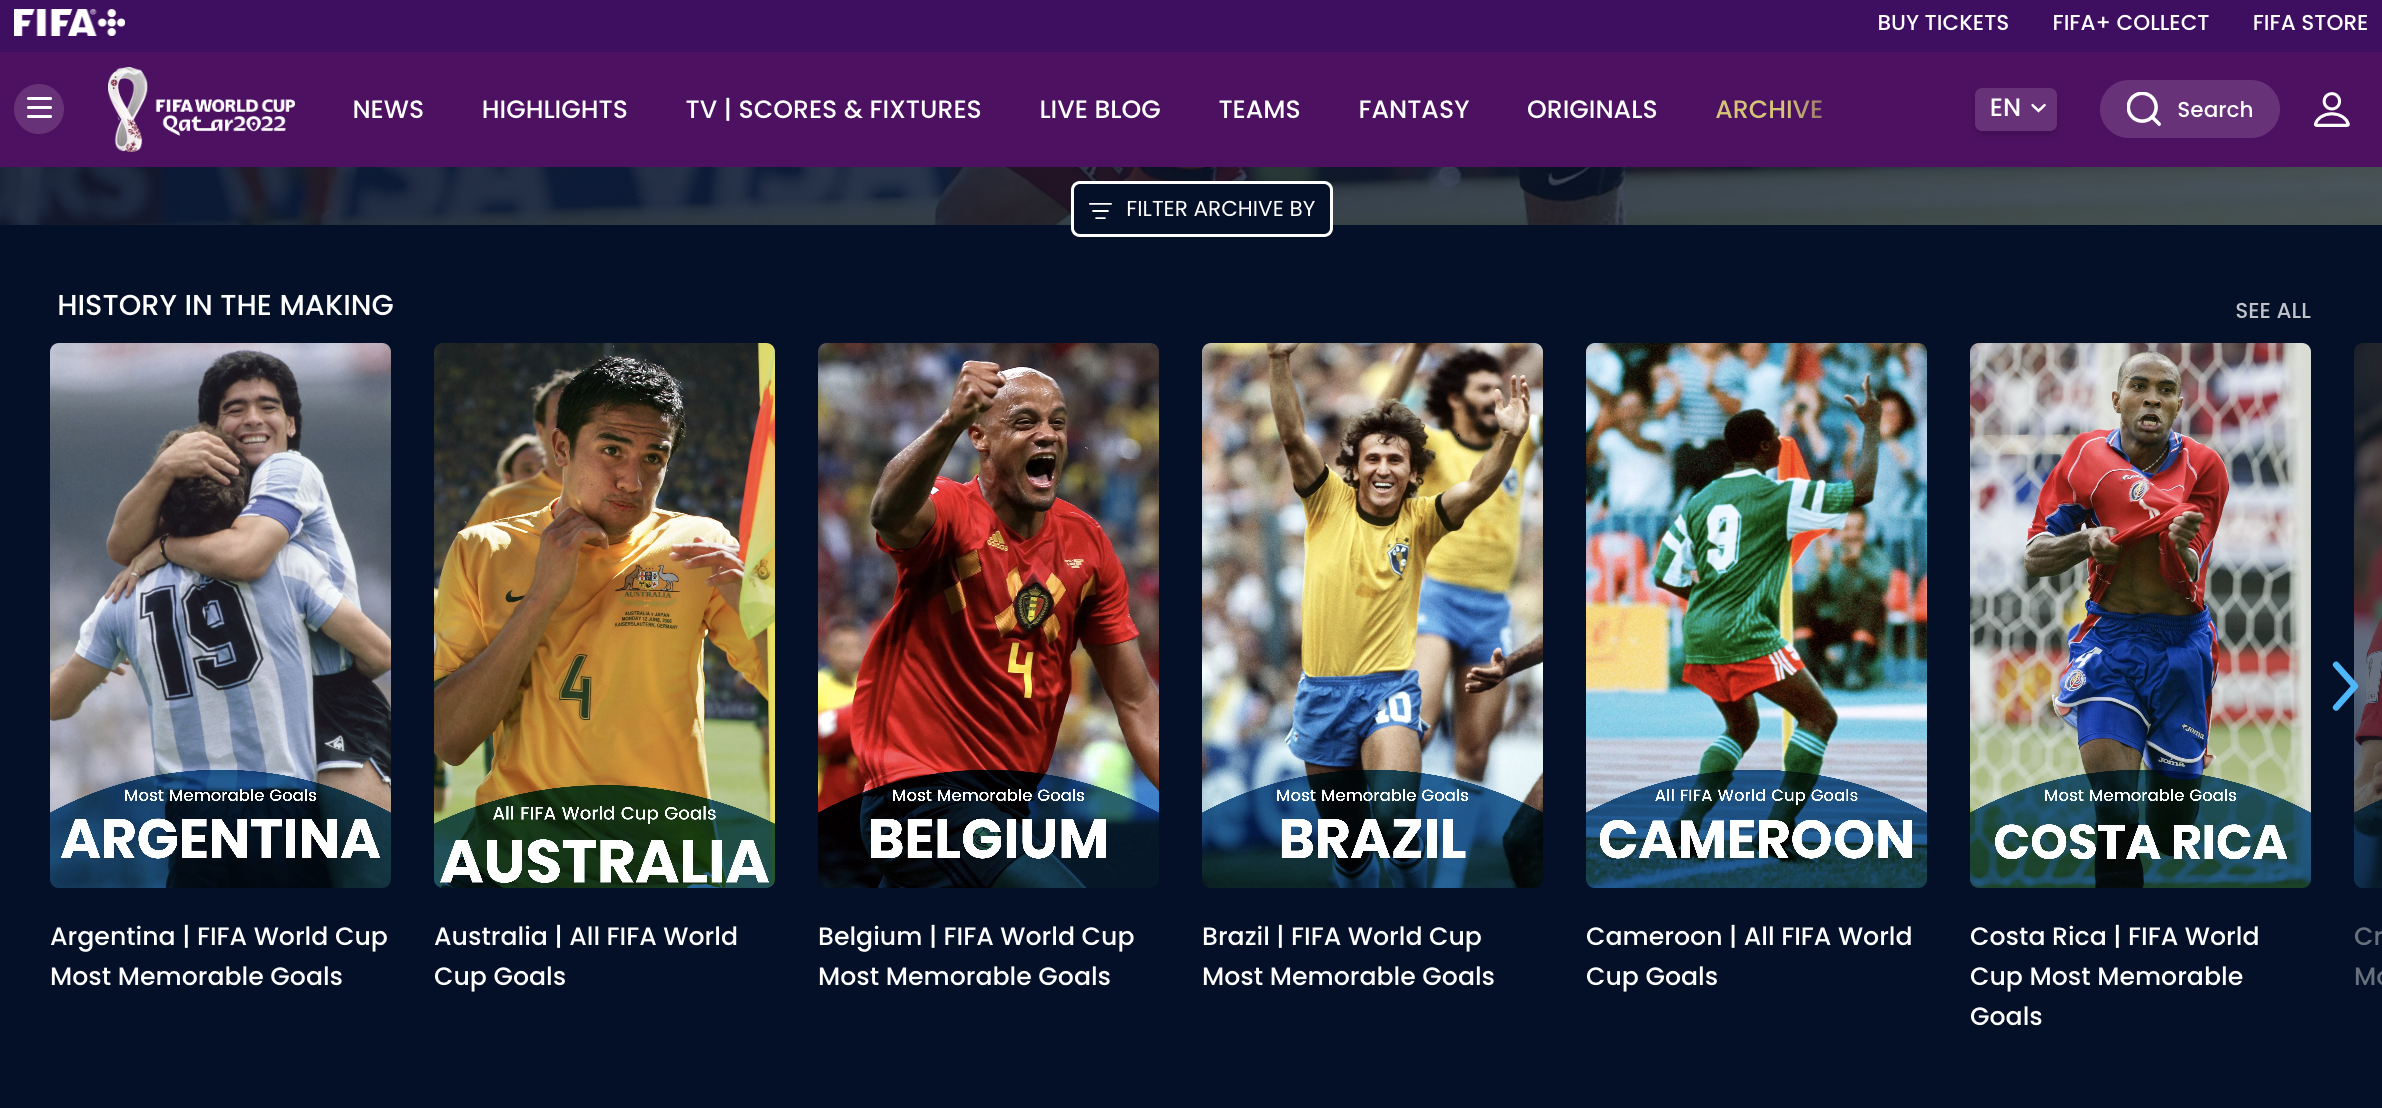 fifa world cup live website